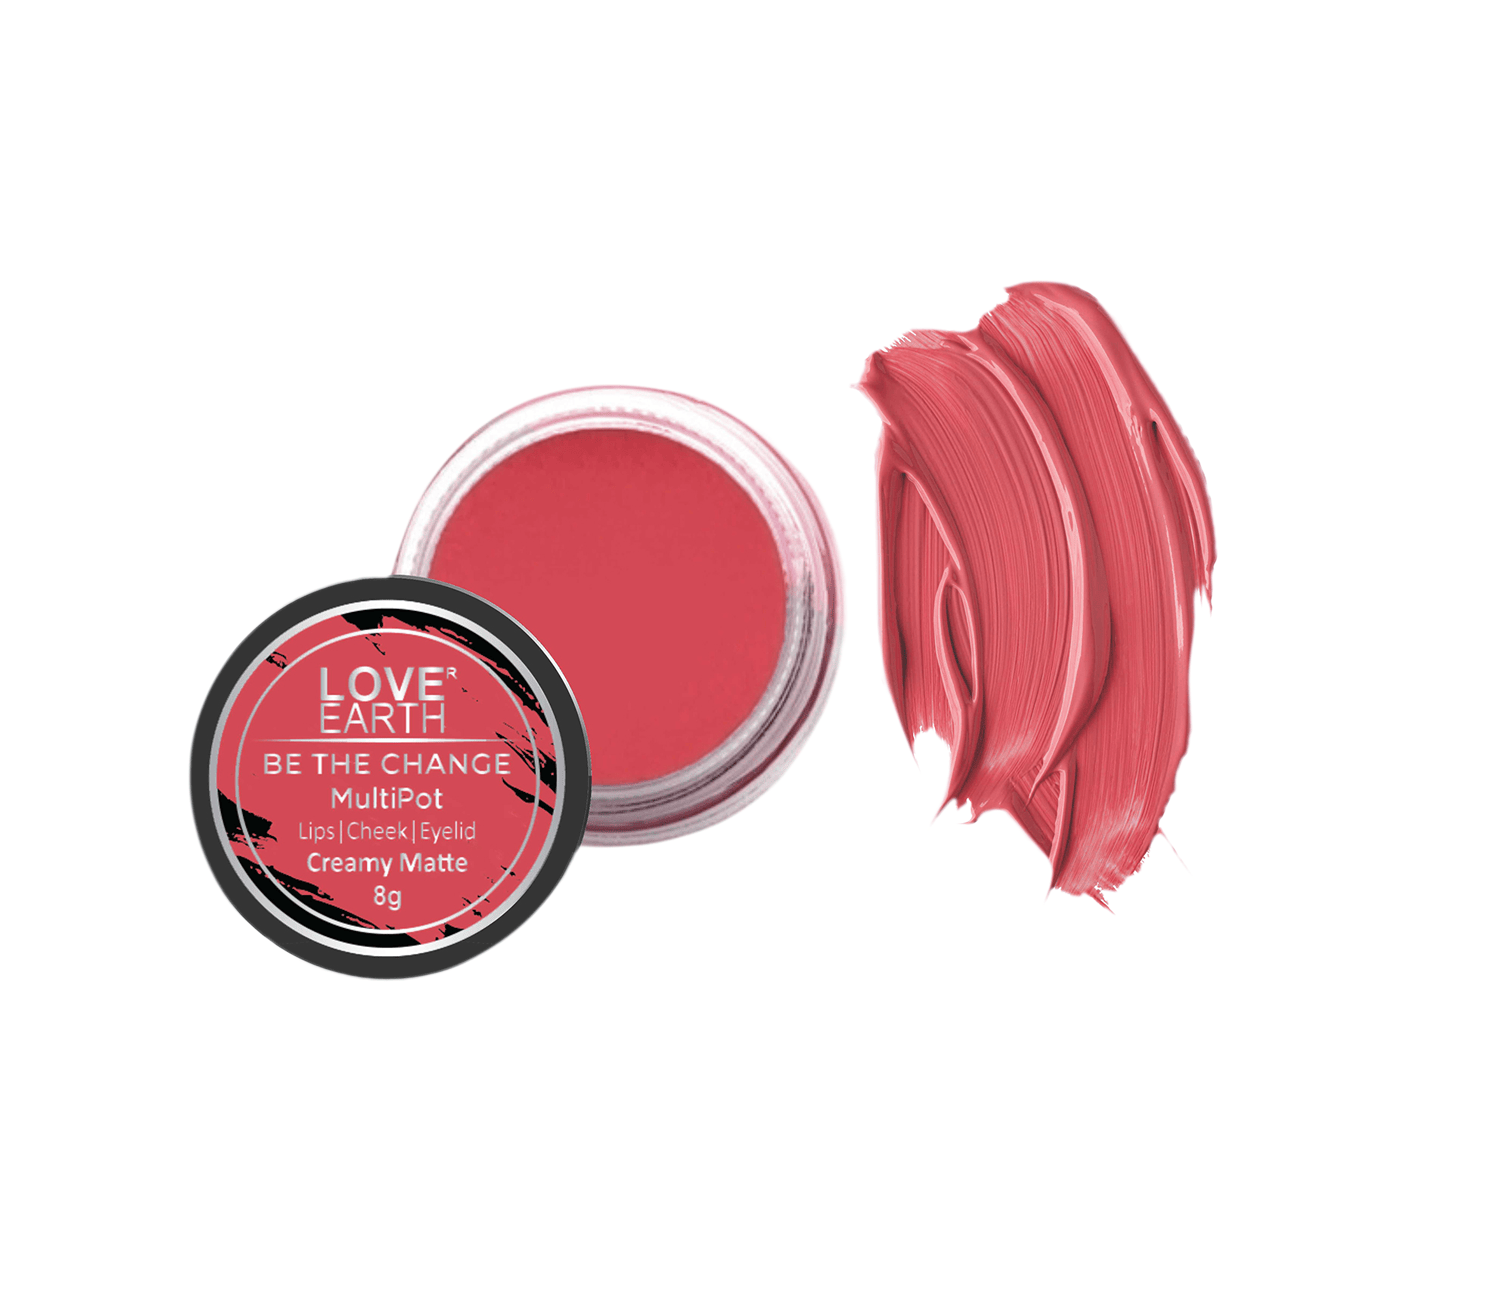 LOVE EARTH | Love Earth Lip Tint & Cheek Tint Multipot-Be The Change With Richness Of Jojoba Oil And Vitamin E For Lips, Eyelids & Cheeks, Matte Finish - Rose Pink